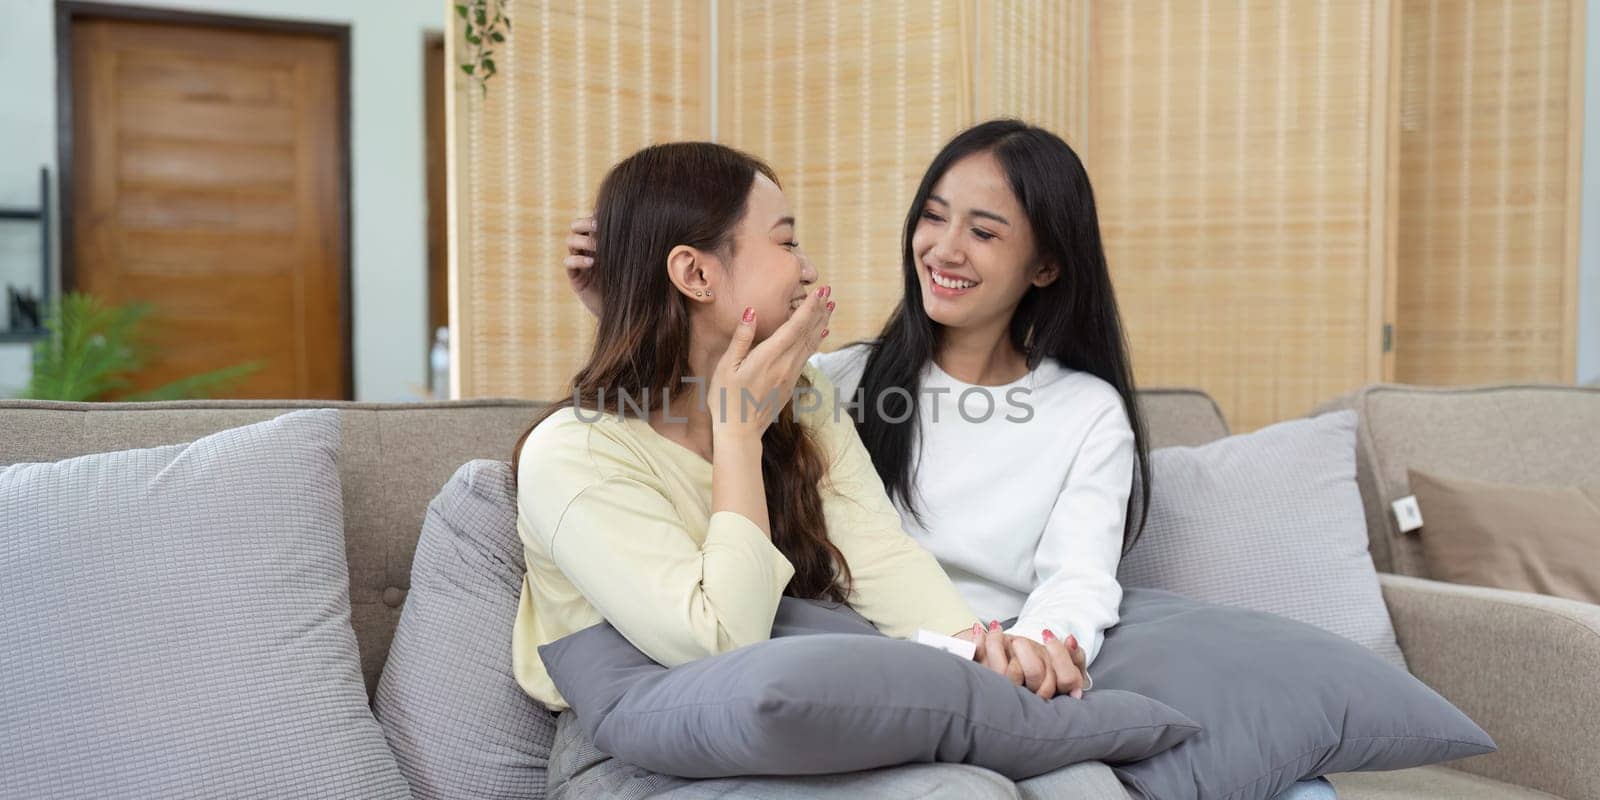 Loving LGBTQIA lesbian gay couple laughing together in Livingroom. Asian LGBTQIA lesbian gay couple laughed happy together while sitting on the sofa. Homosexual-LGBTQ concept. by itchaznong